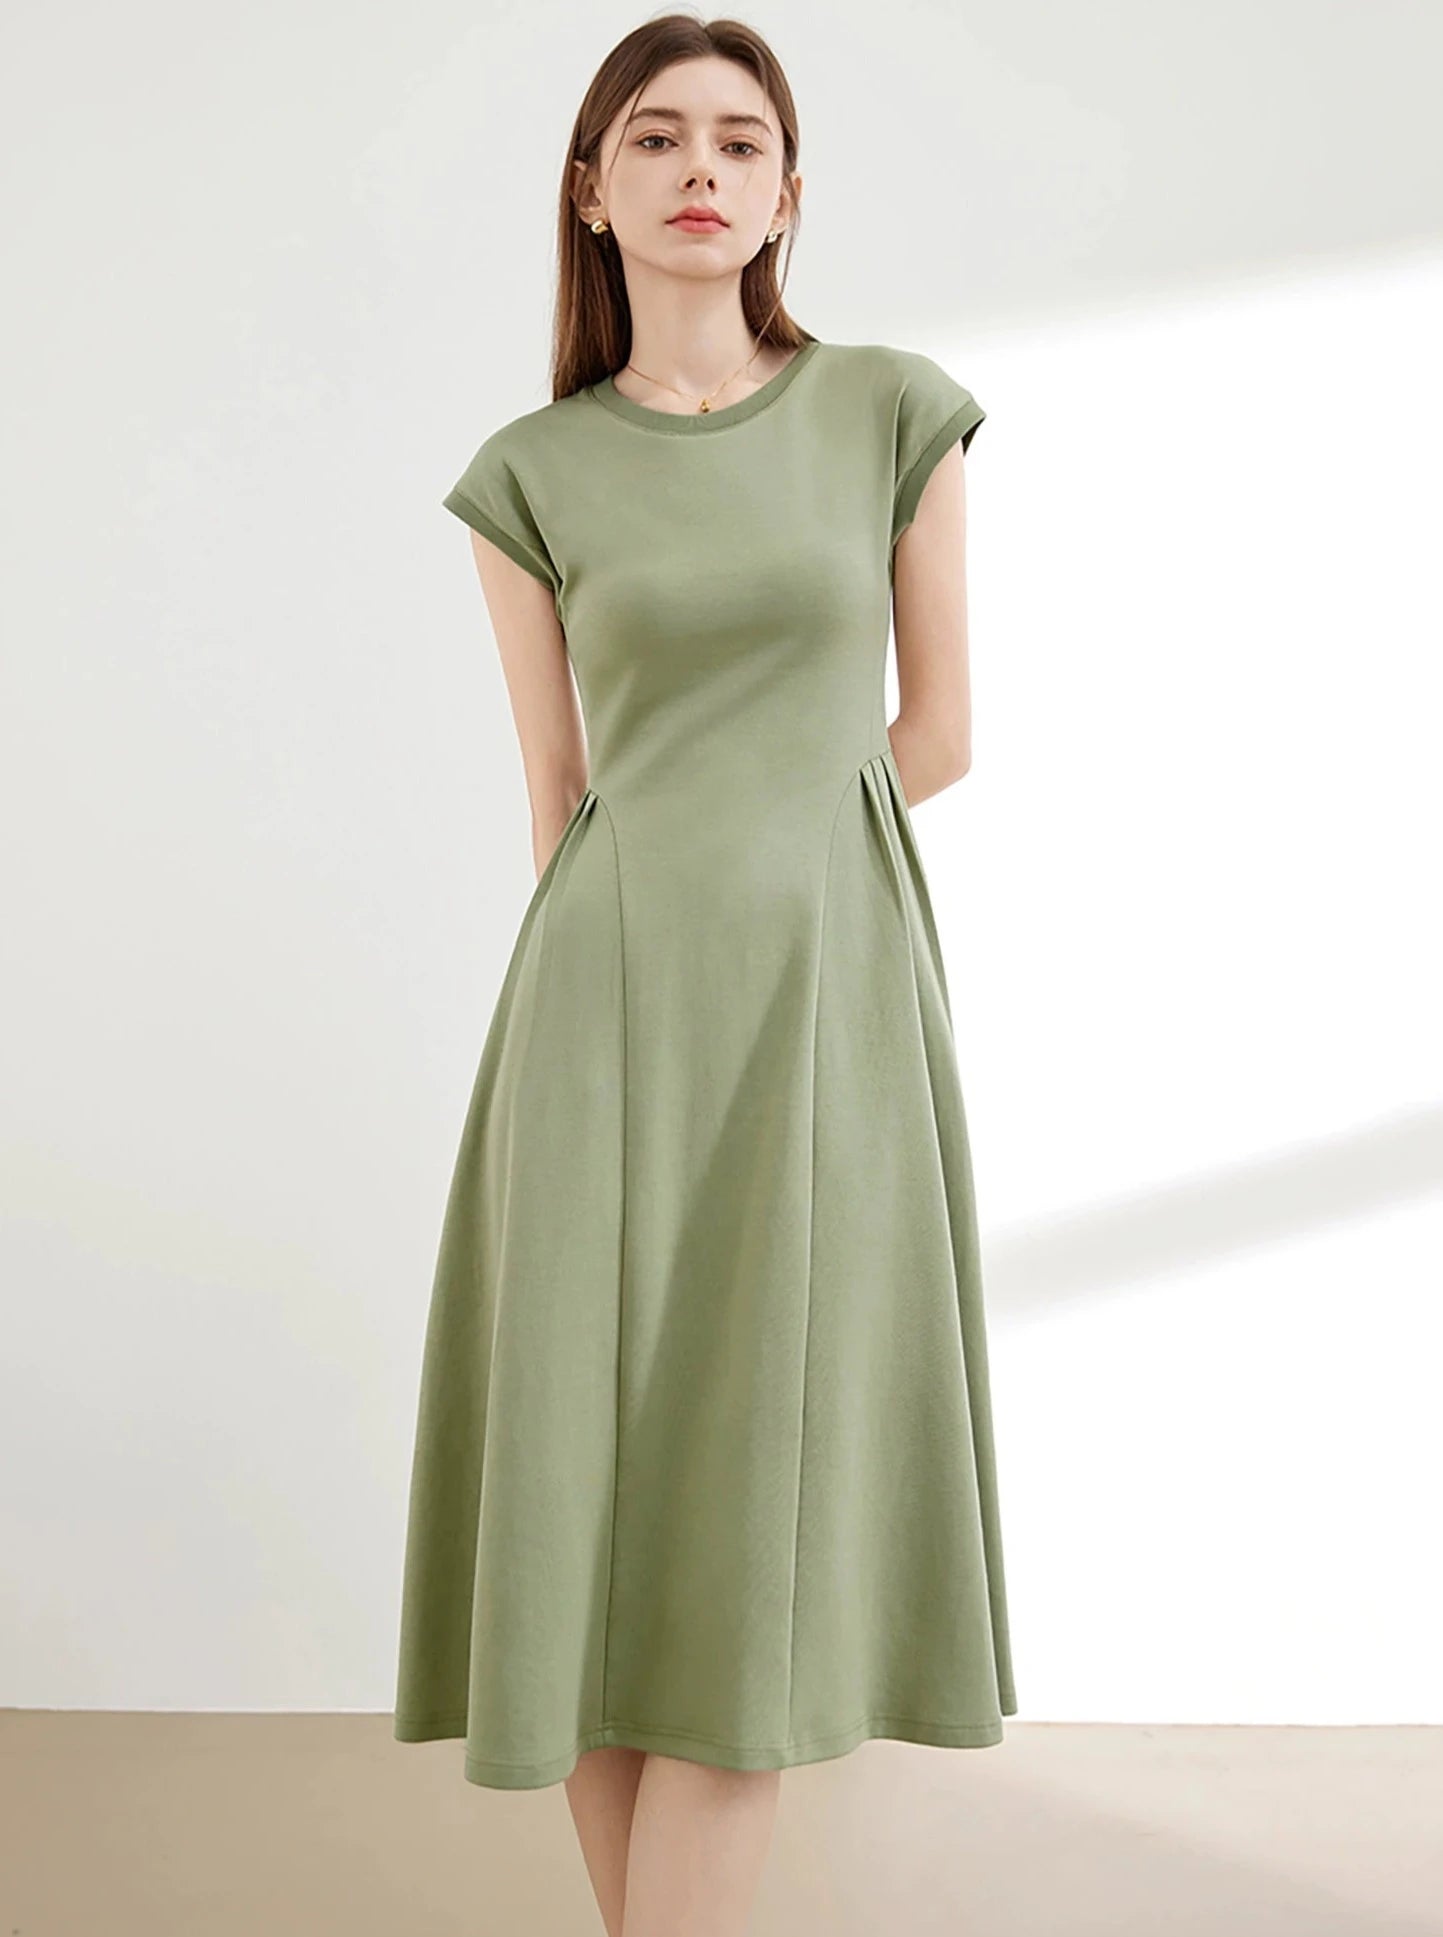 Solid Color Thin Knit Dress